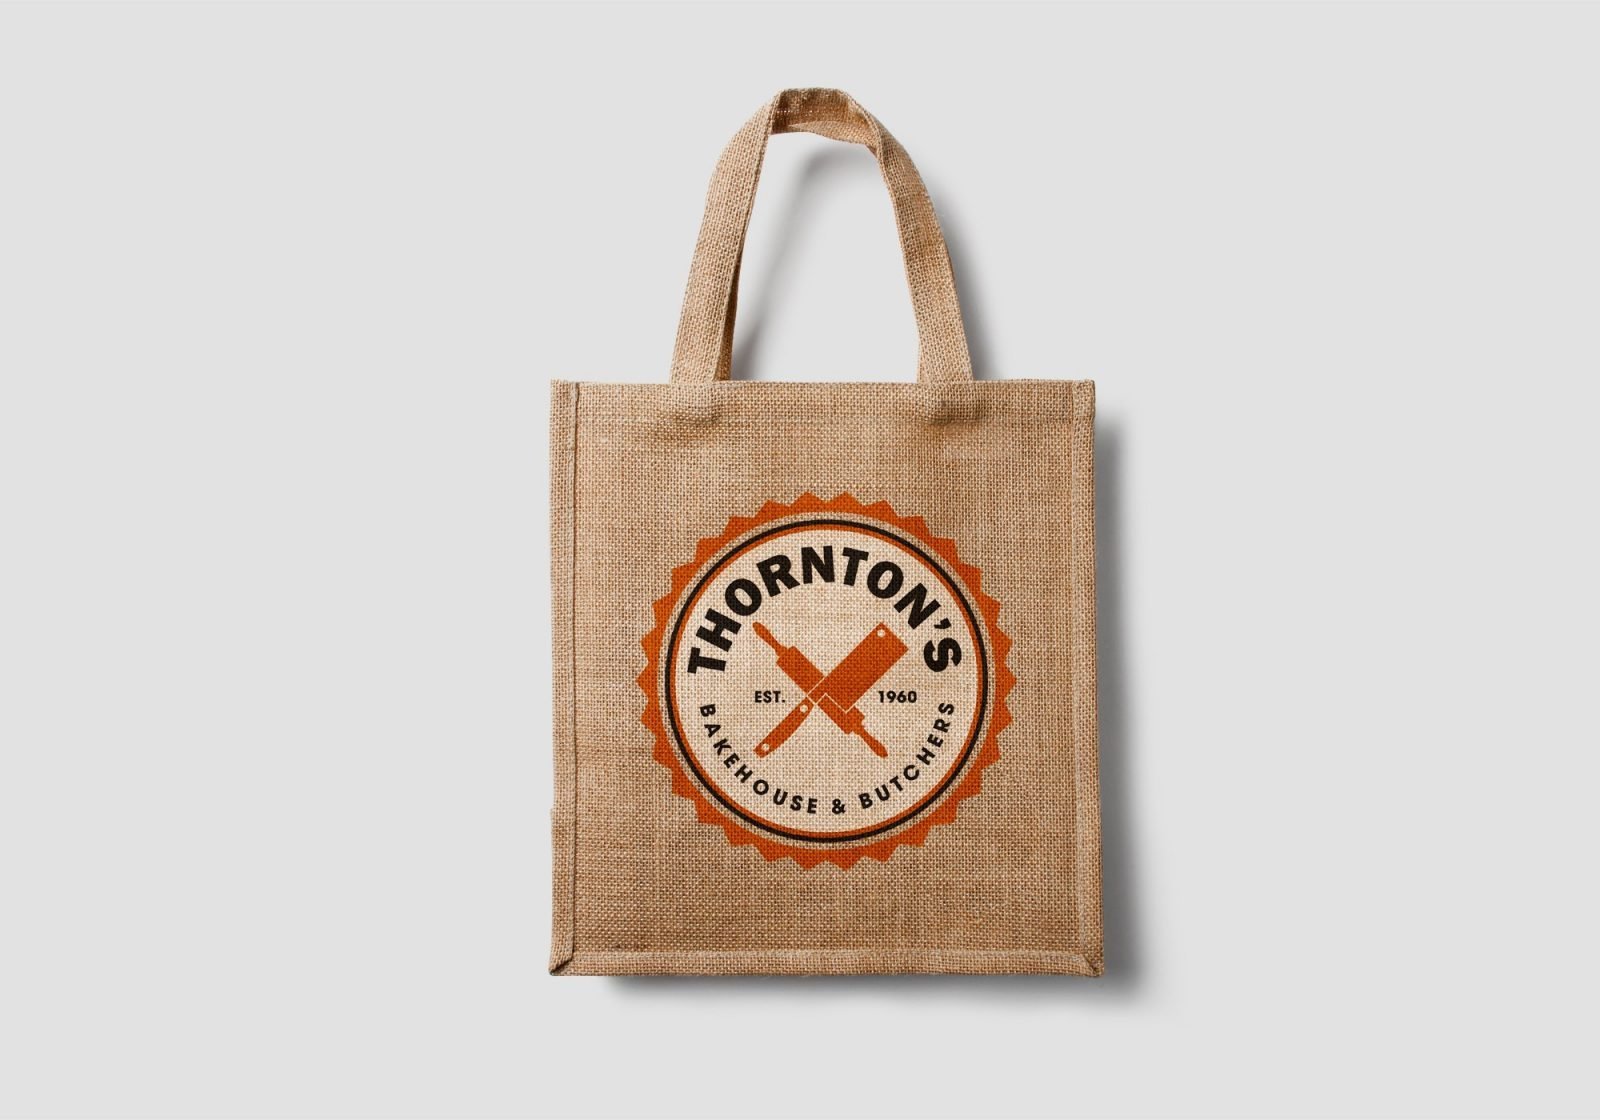 A hessian bag design for Thornton's Butchers and Bakehouse showing the logo